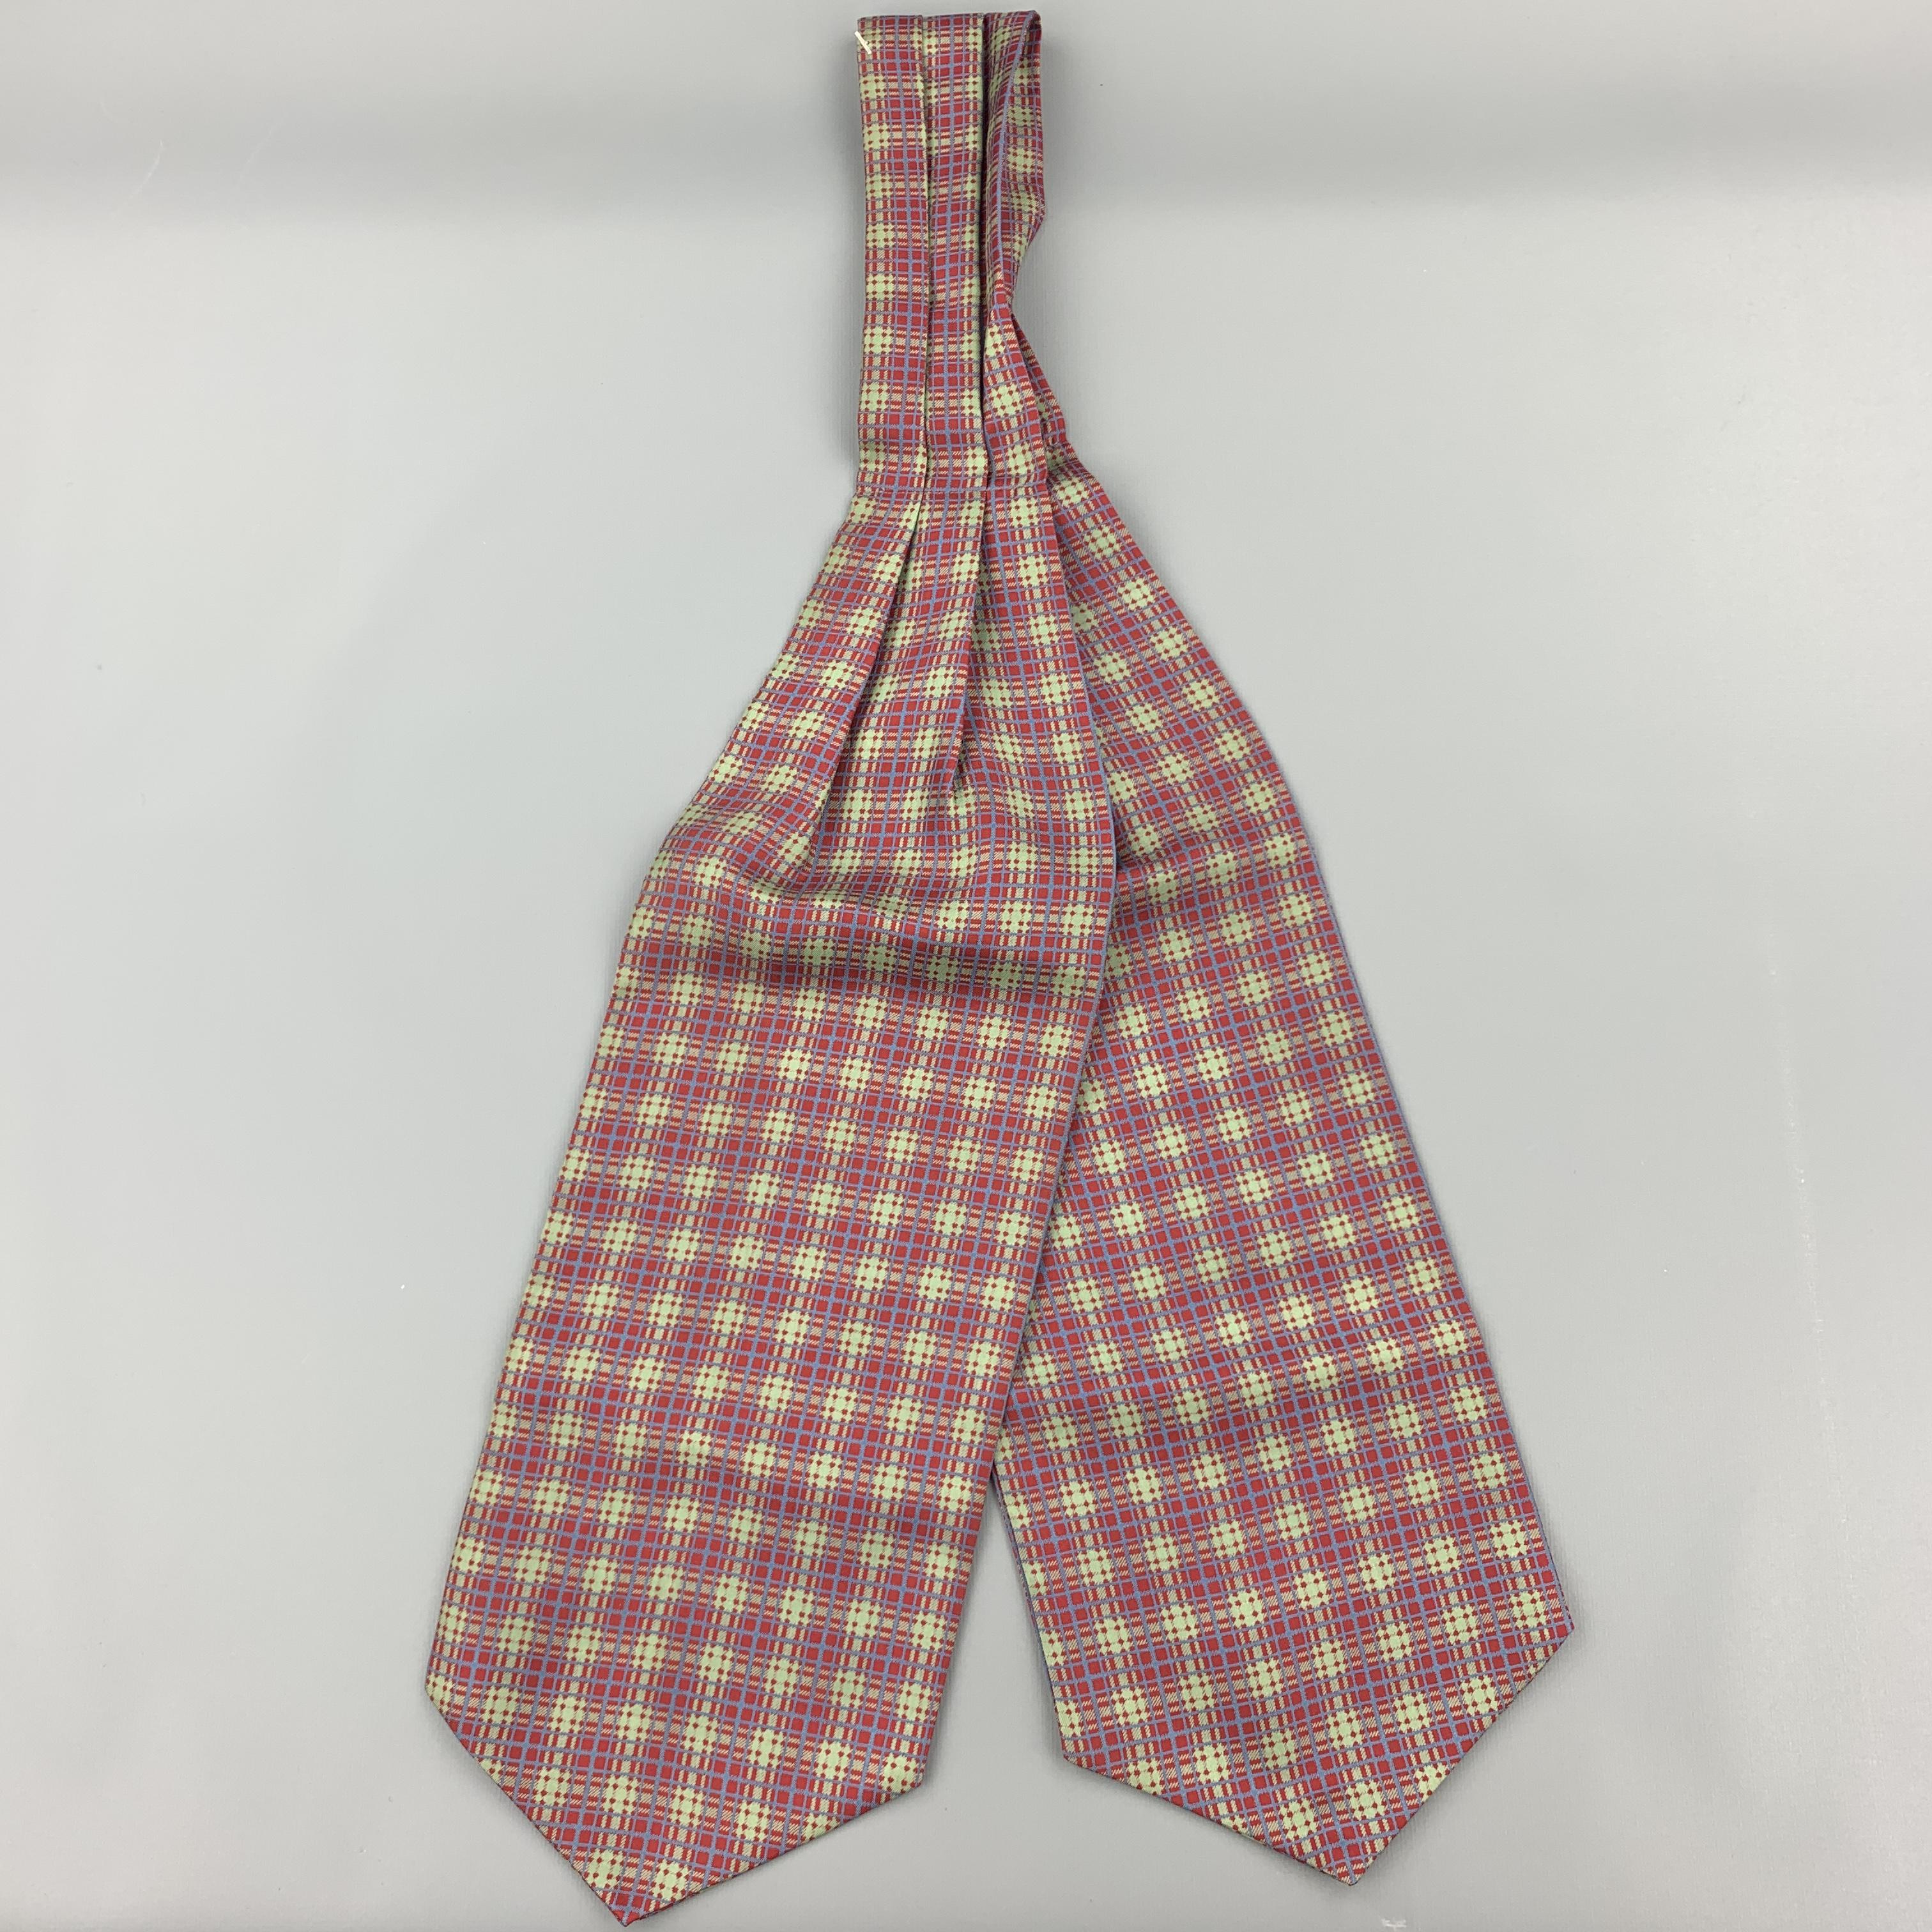 DENIS COLBAN ascot comes in a burgundy & green plaid silk. Made in France.

Excellent Pre-Owned Condition.
Measurements:

Shortest Width: 2.5 in. 
Longest Width: 6 in. 
Length: 46 in.